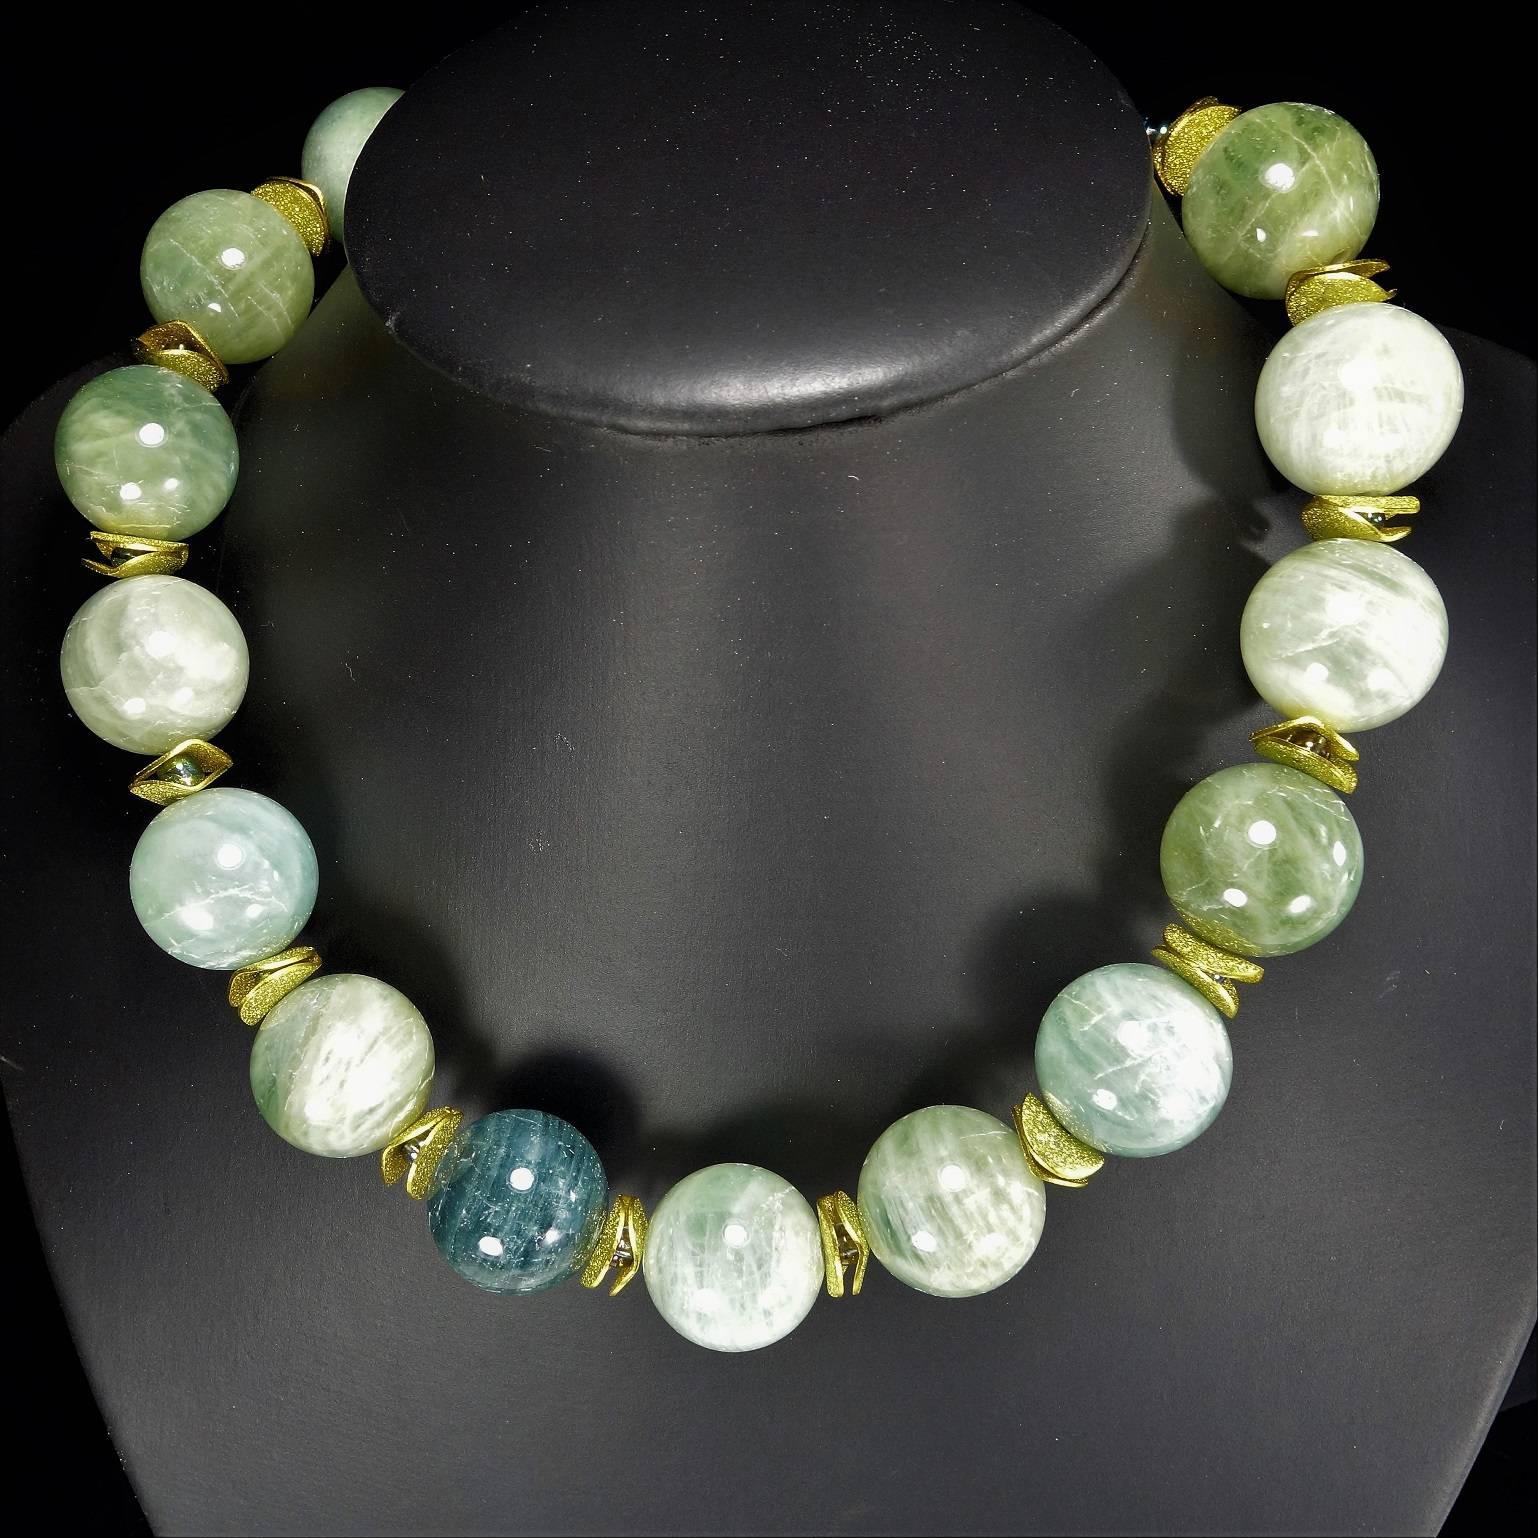 Glowing, Large Spheres of Polished Opaque Aquamarine Choker  March Birthstone 3